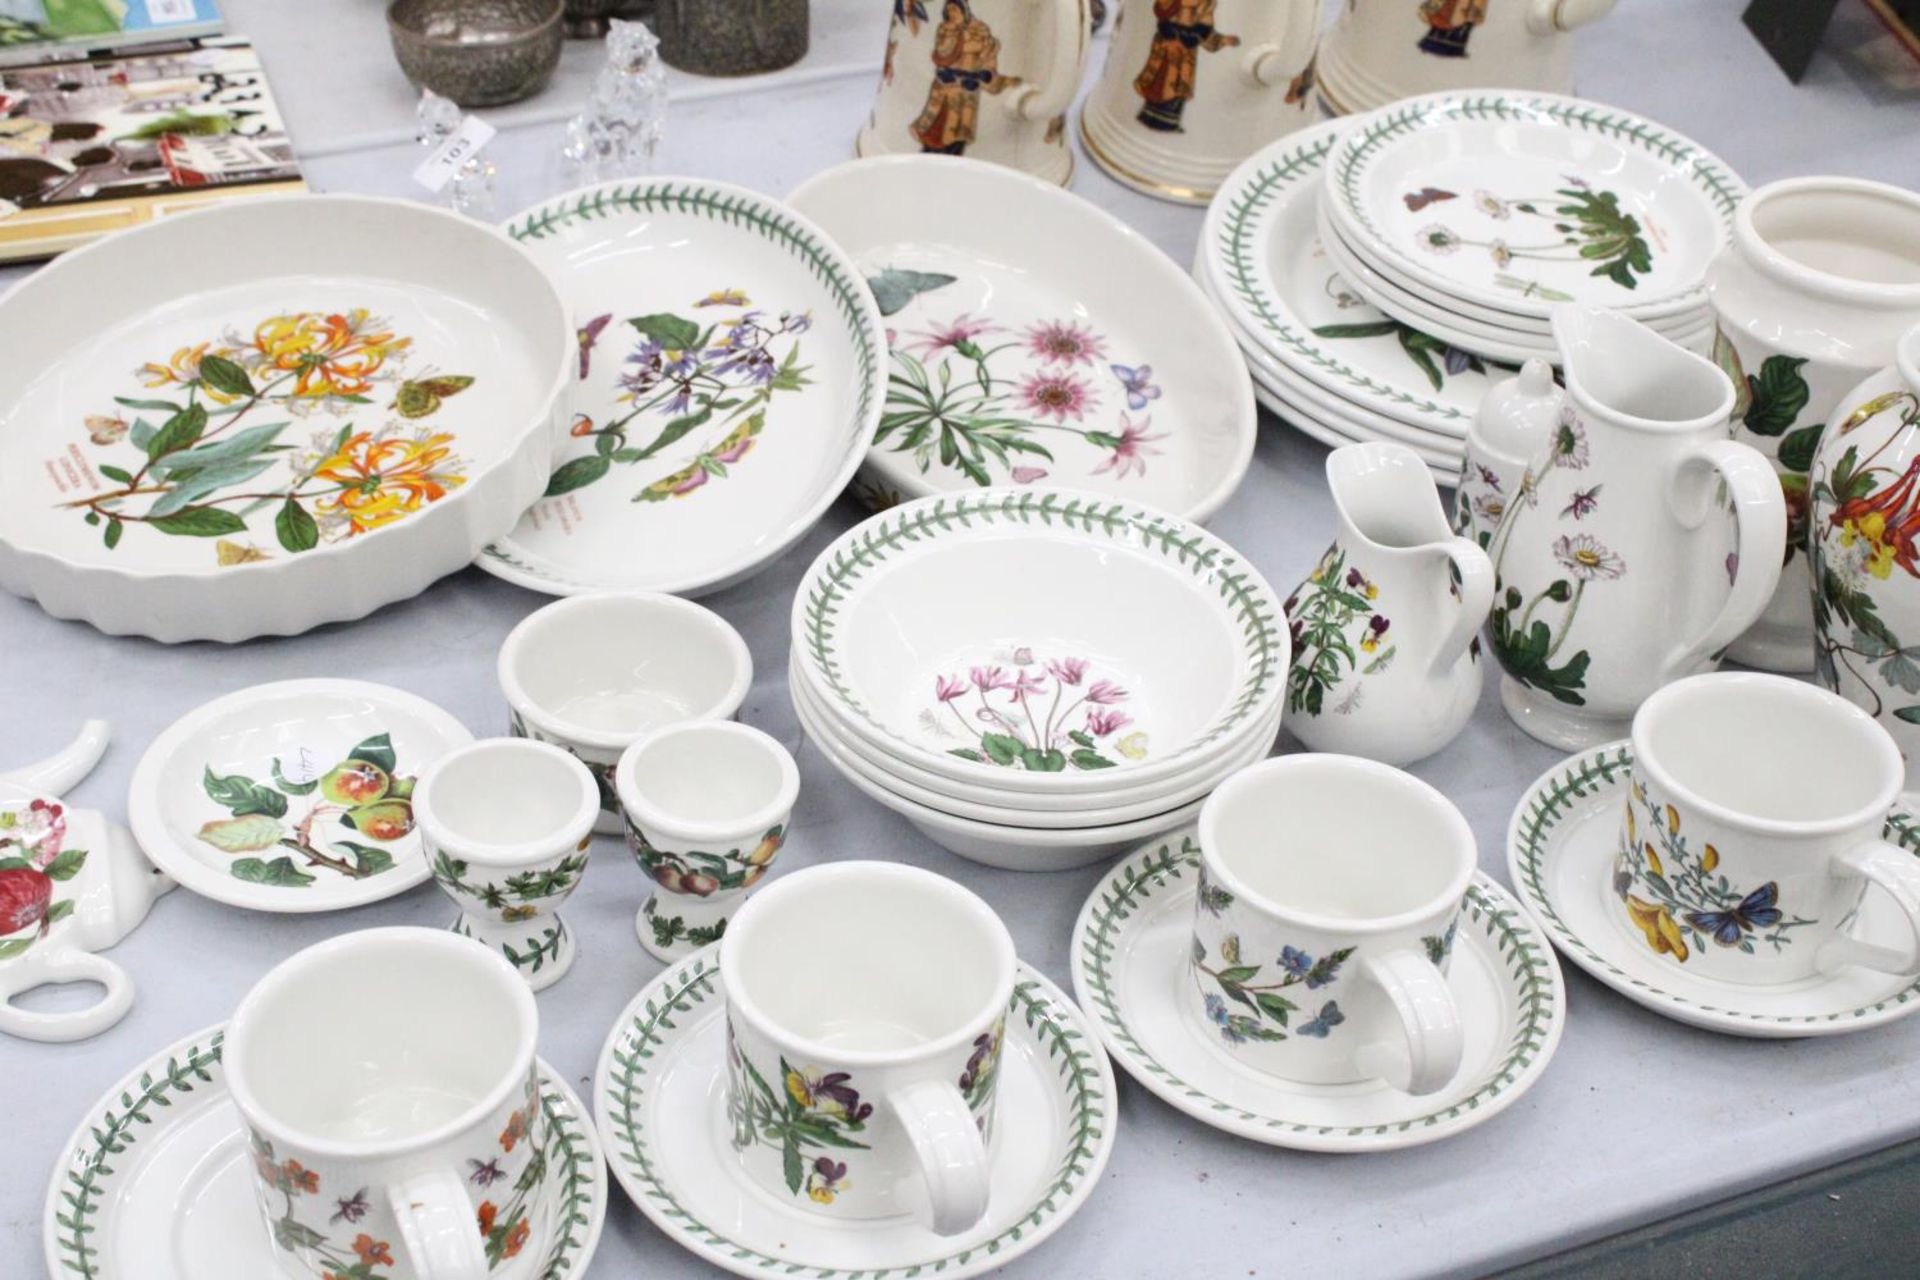 A LARGE QUANTITY OF PORTMEIRION BONTANIC GARDEN DINNERWARE - TO INCLUDE JUGS, PLATES, EGG CUPS ETC - Image 5 of 6